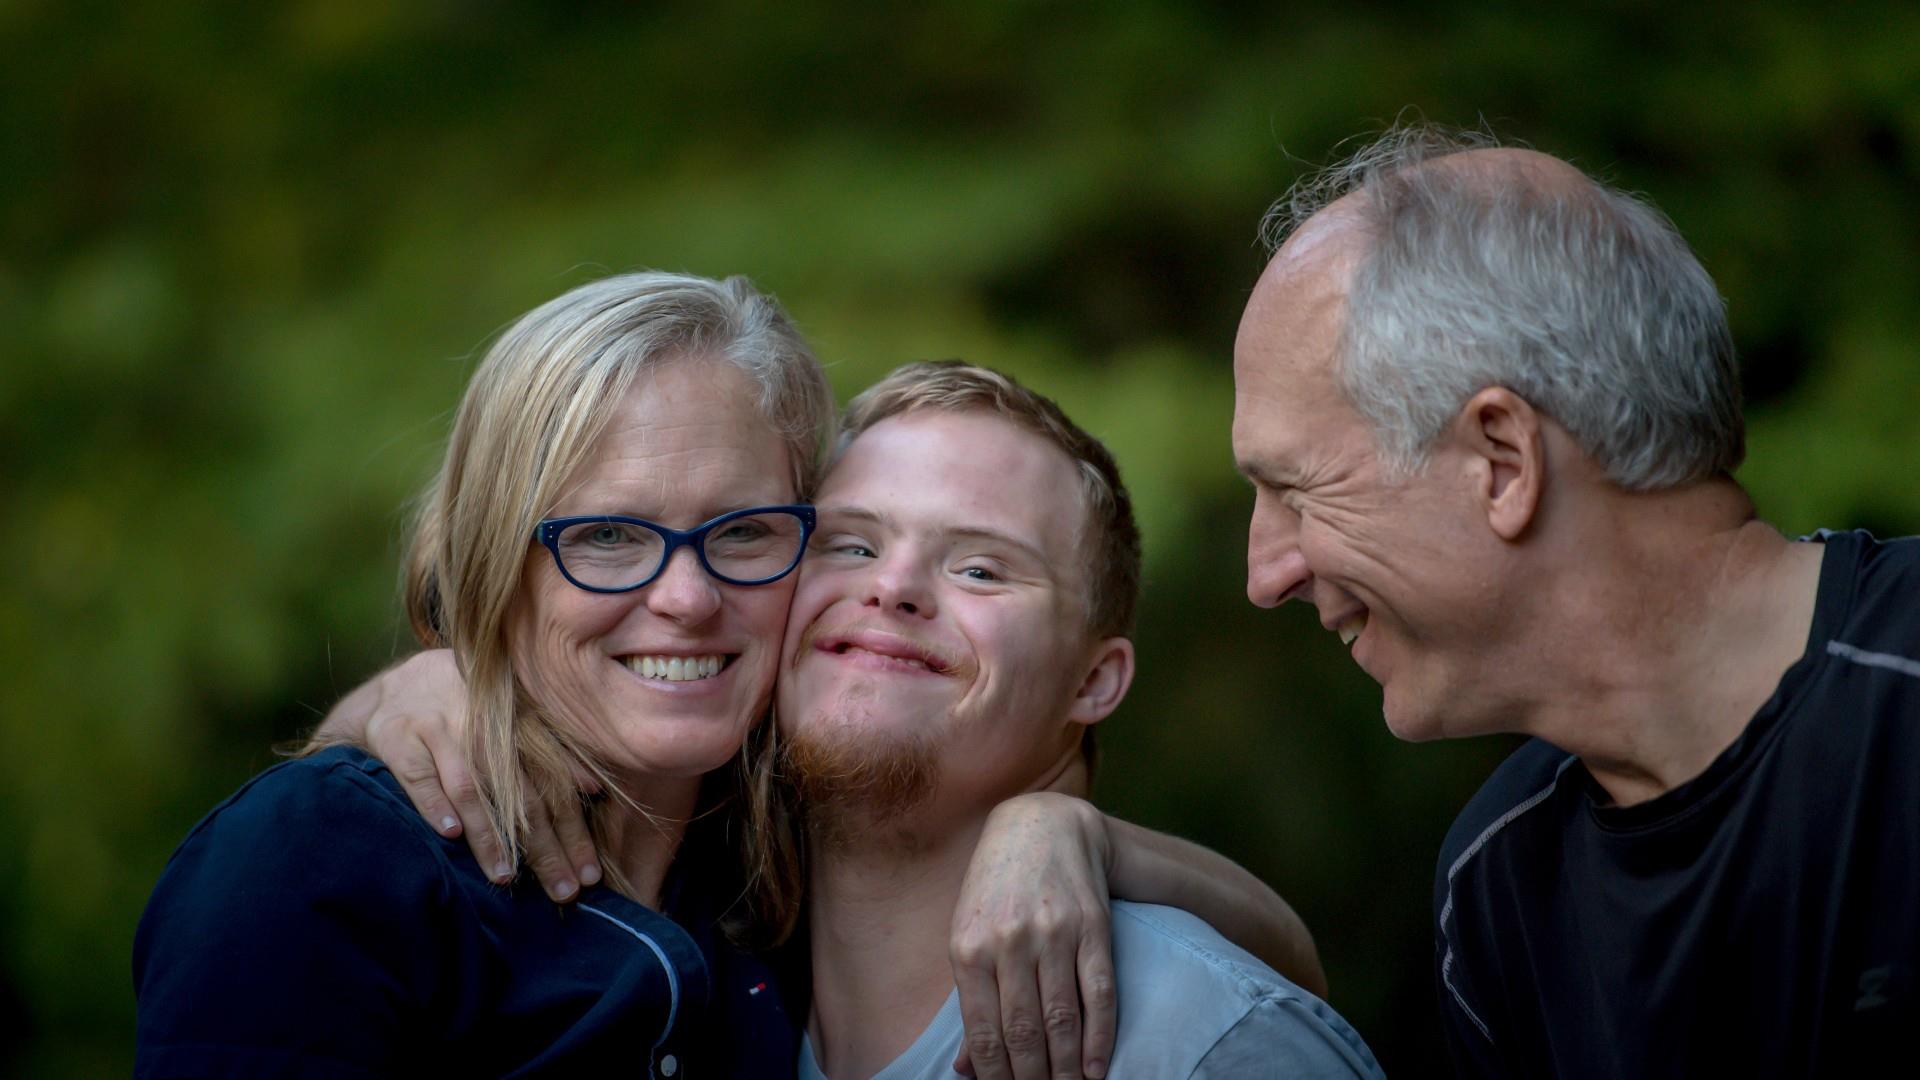 Accessible - Family with son with Downs Syndrome